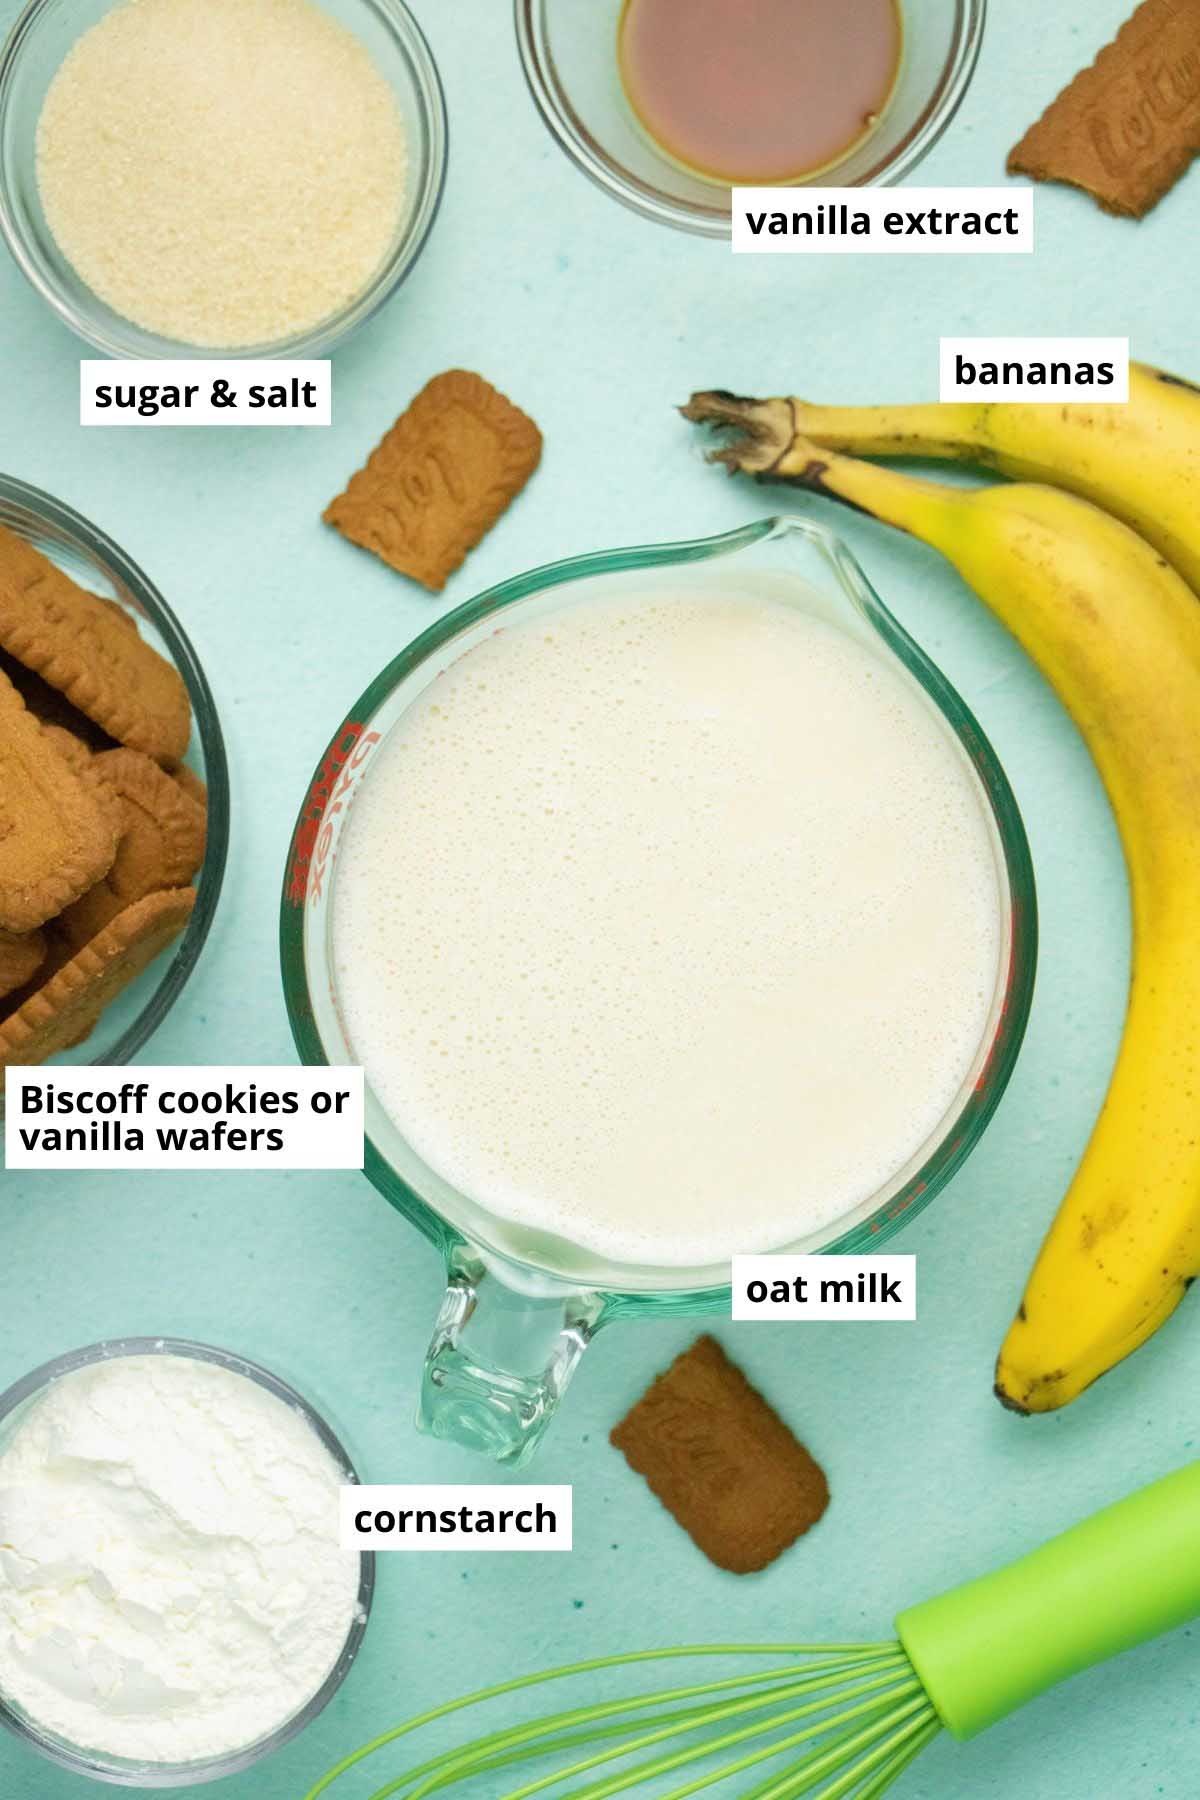 oat milk, cornstarch, vanilla, sugar, cookies, and bananas arranged on a blue table with a whisk